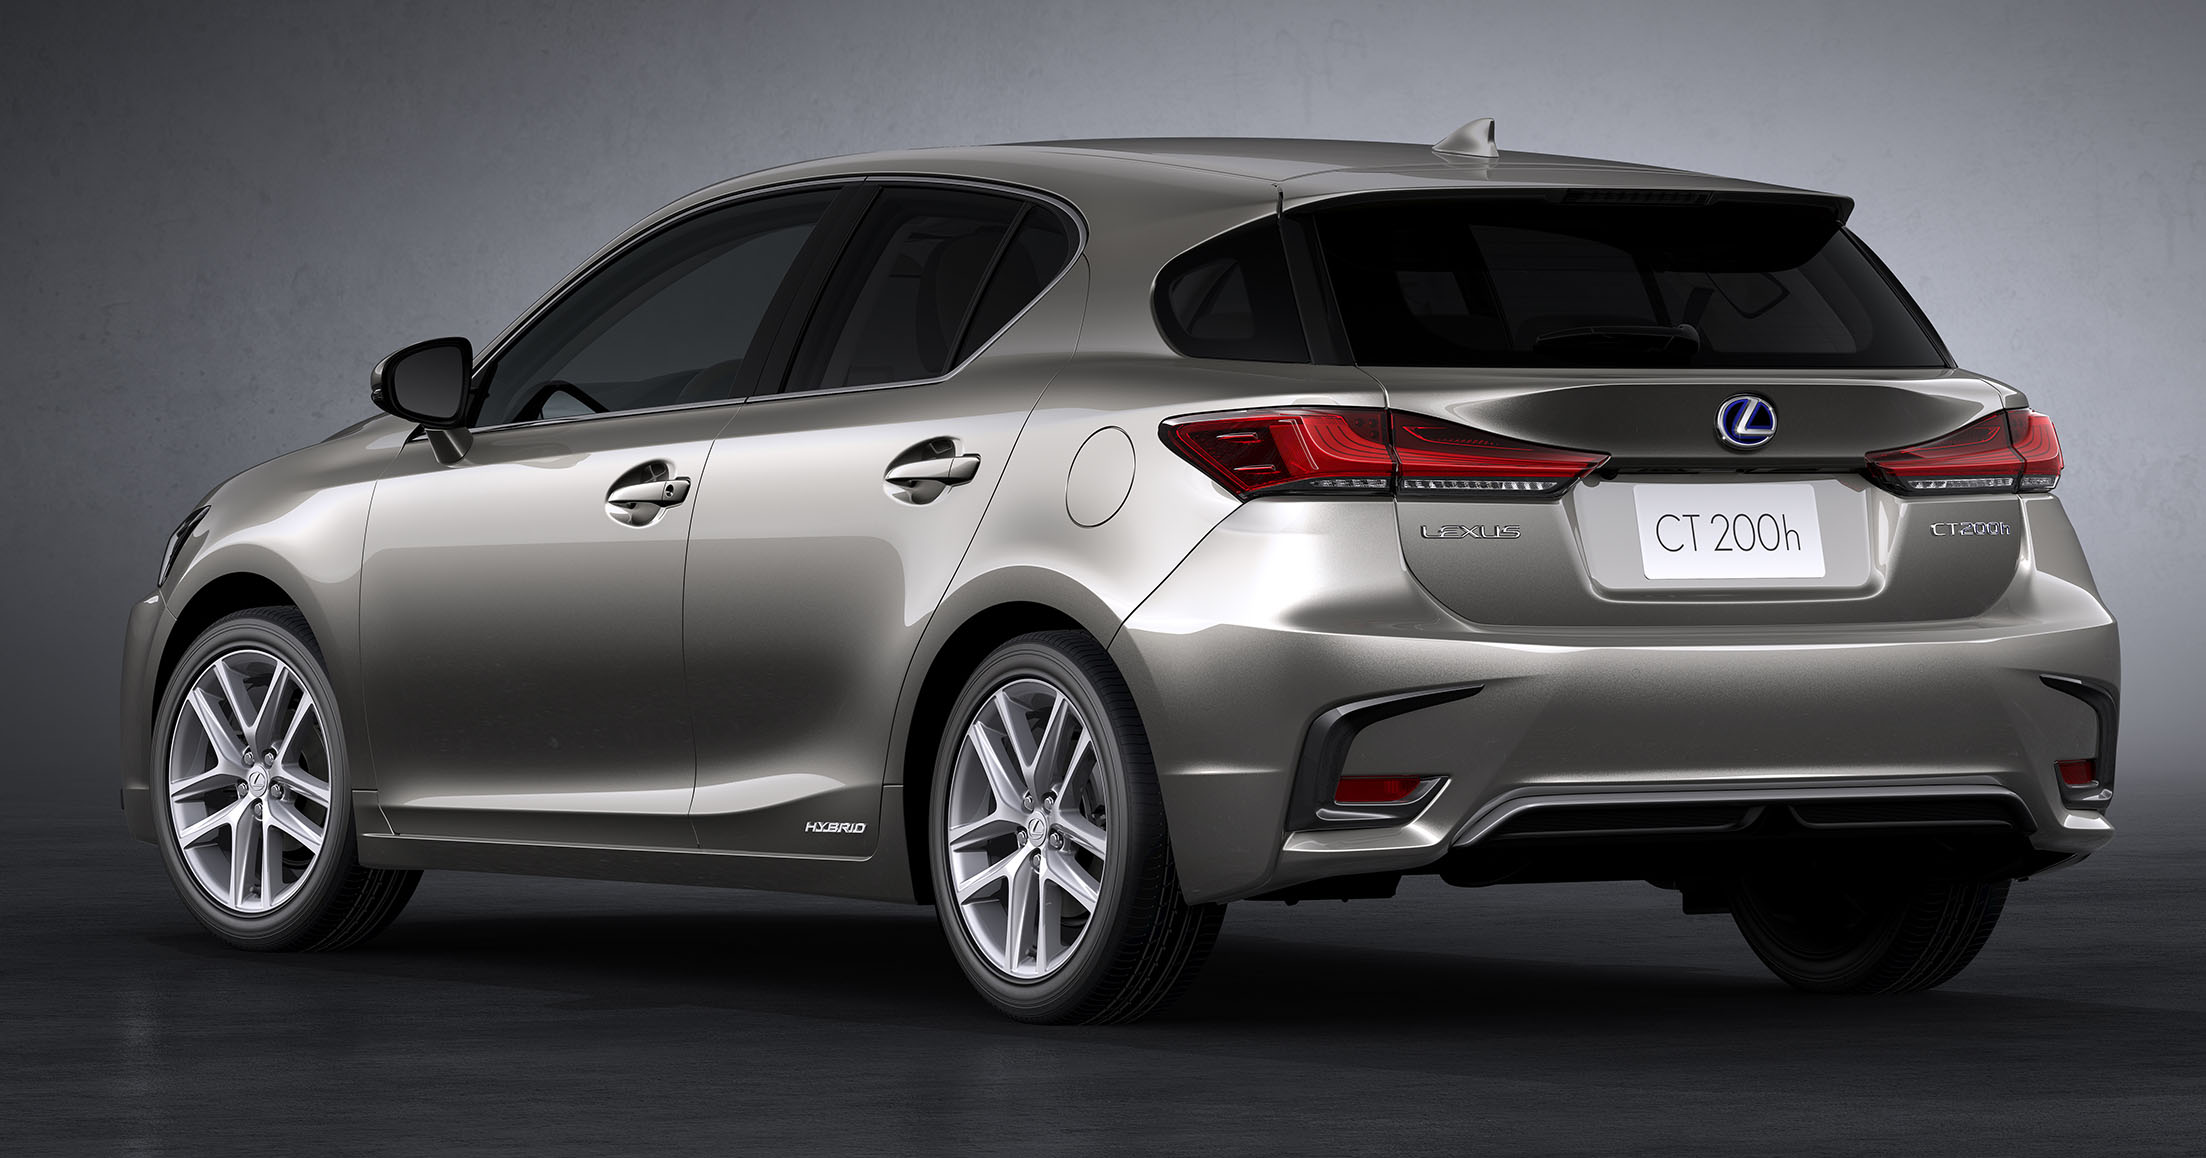 2018 Lexus CT 200h revealed with new styling, tech 2018